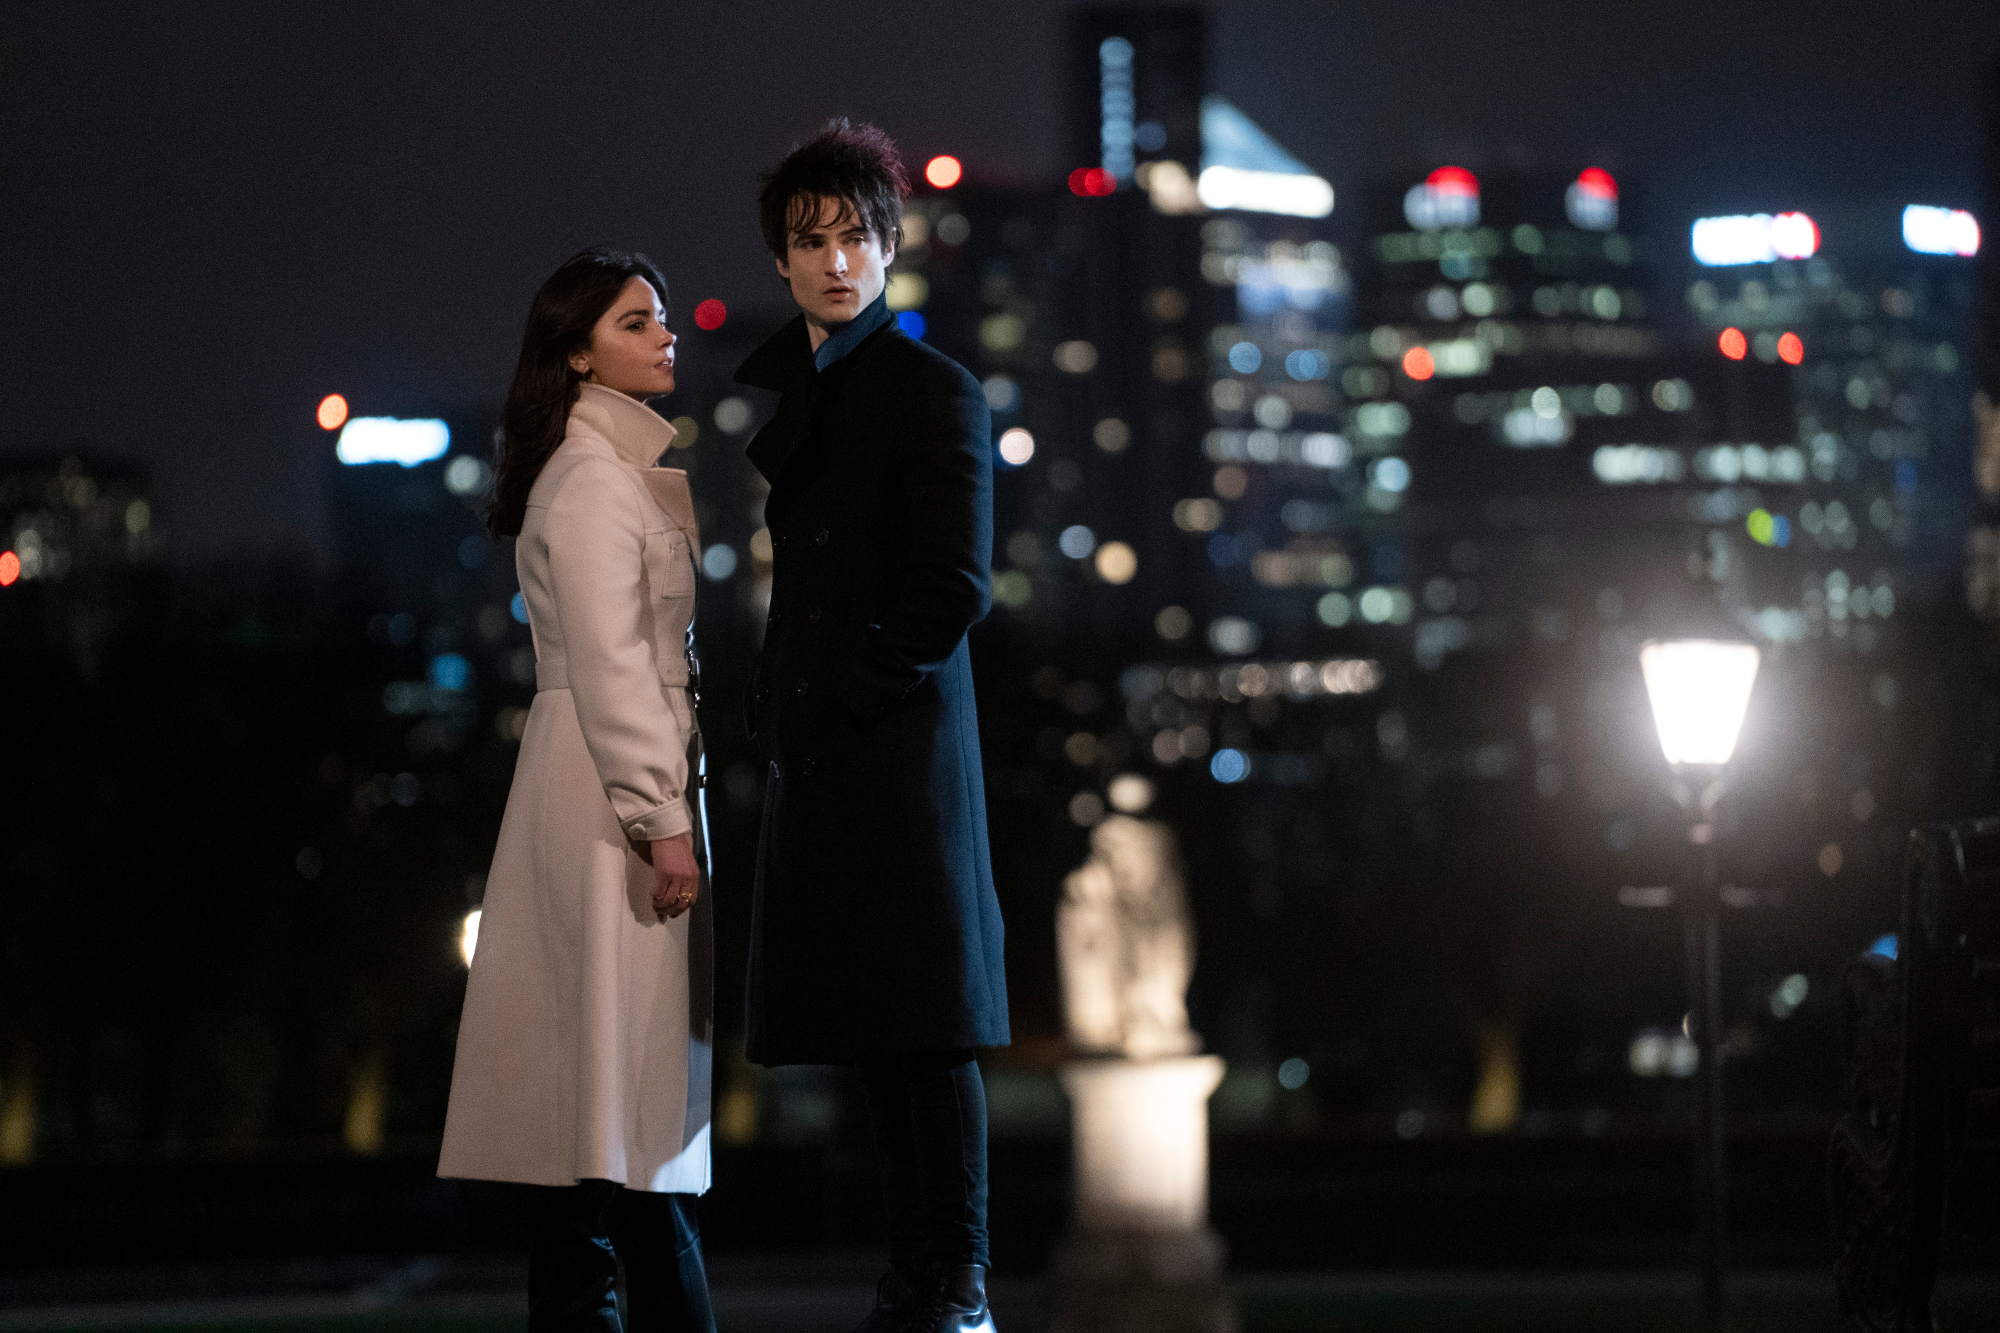 Jenna Coleman as Johanna and Tom Sturridge as Dream in 'The Sandman,' which will drop its first 10 episodes on Netflix on Aug. 5. The pair are standing next to one another and looking at something off-screen. The city is behind them.